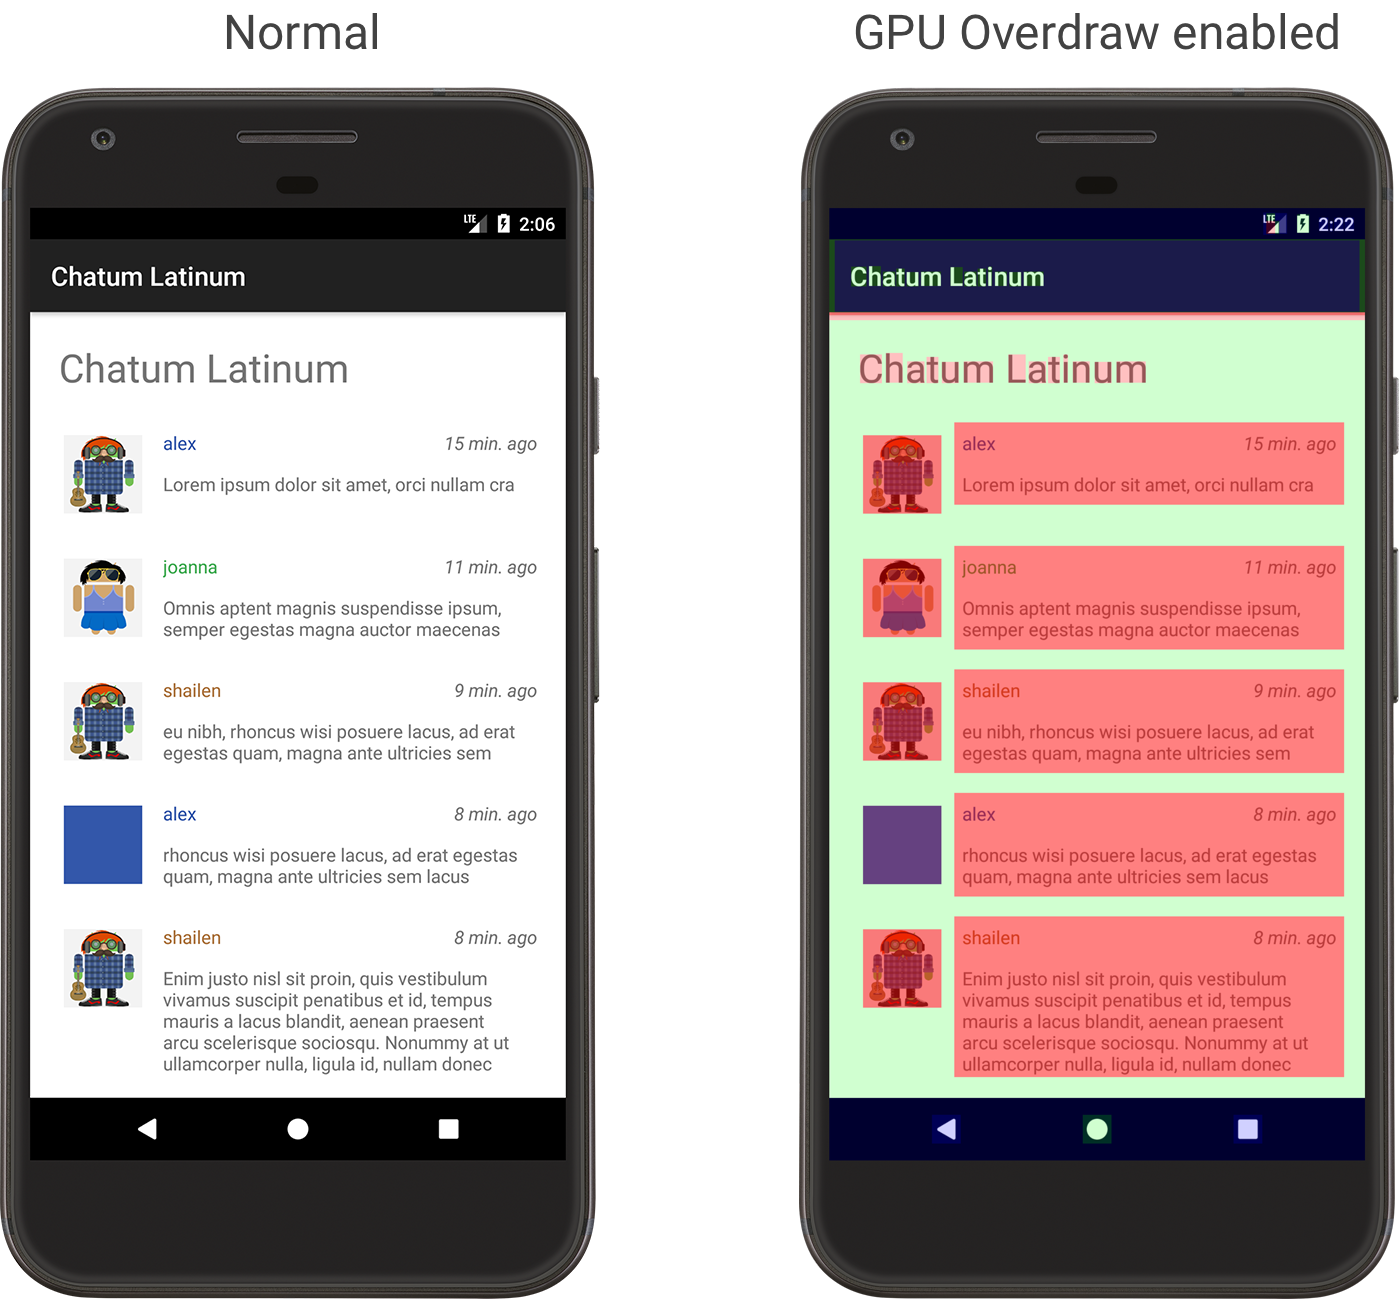 Gpu レンダリングの速度とオーバードローを検査する Android デベロッパー Android Developers